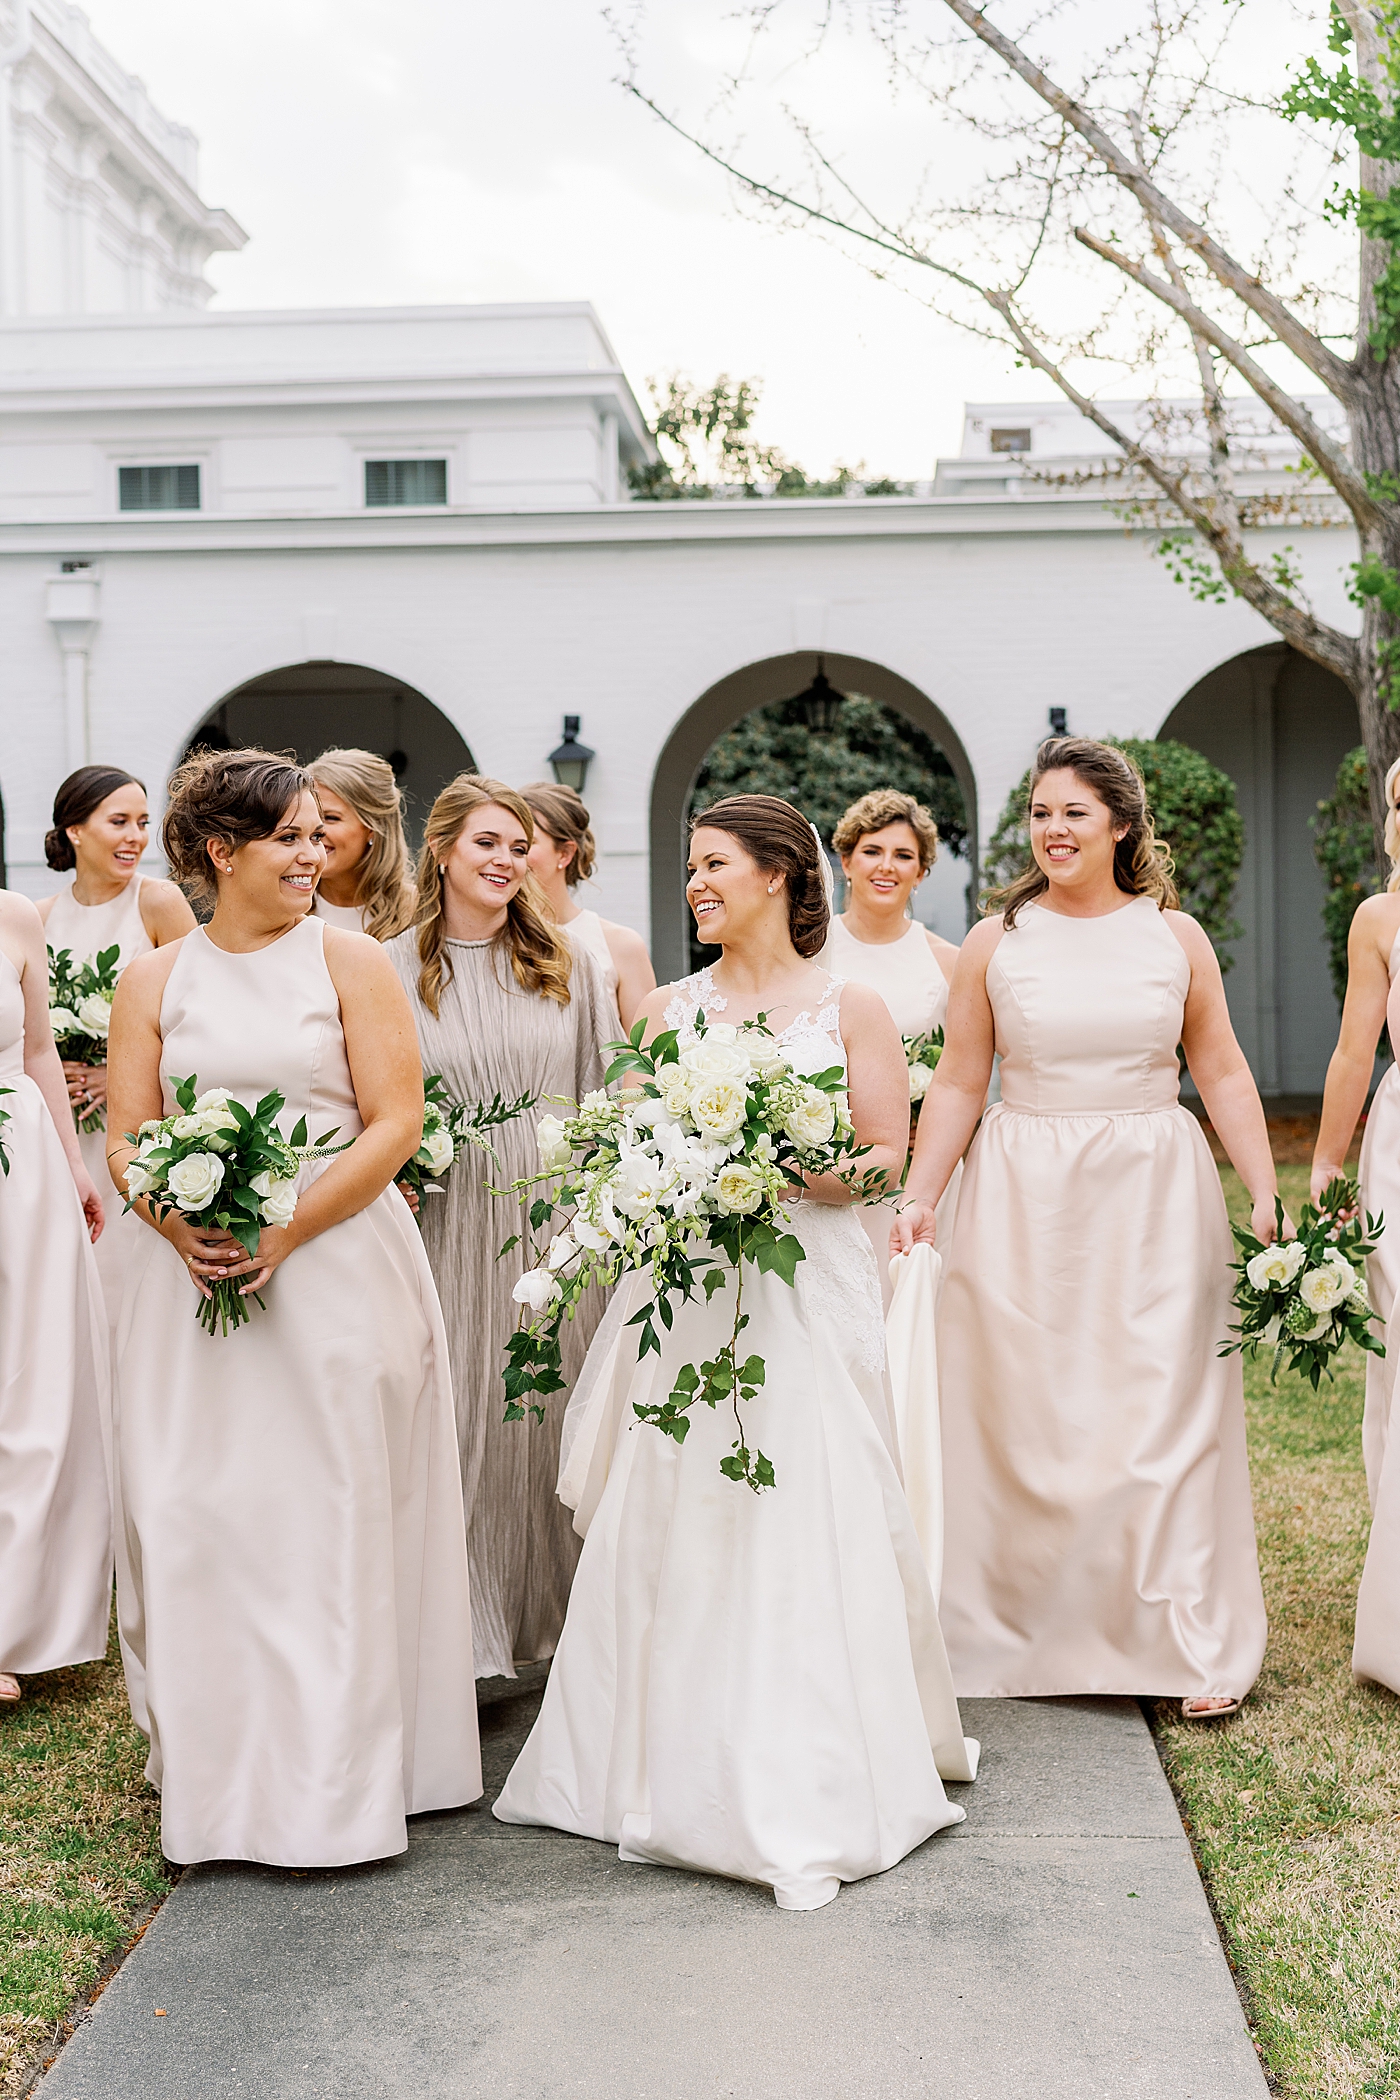 Bridal party walking together during Timeless Country Club Wedding | Photo by Annie Laura Photography